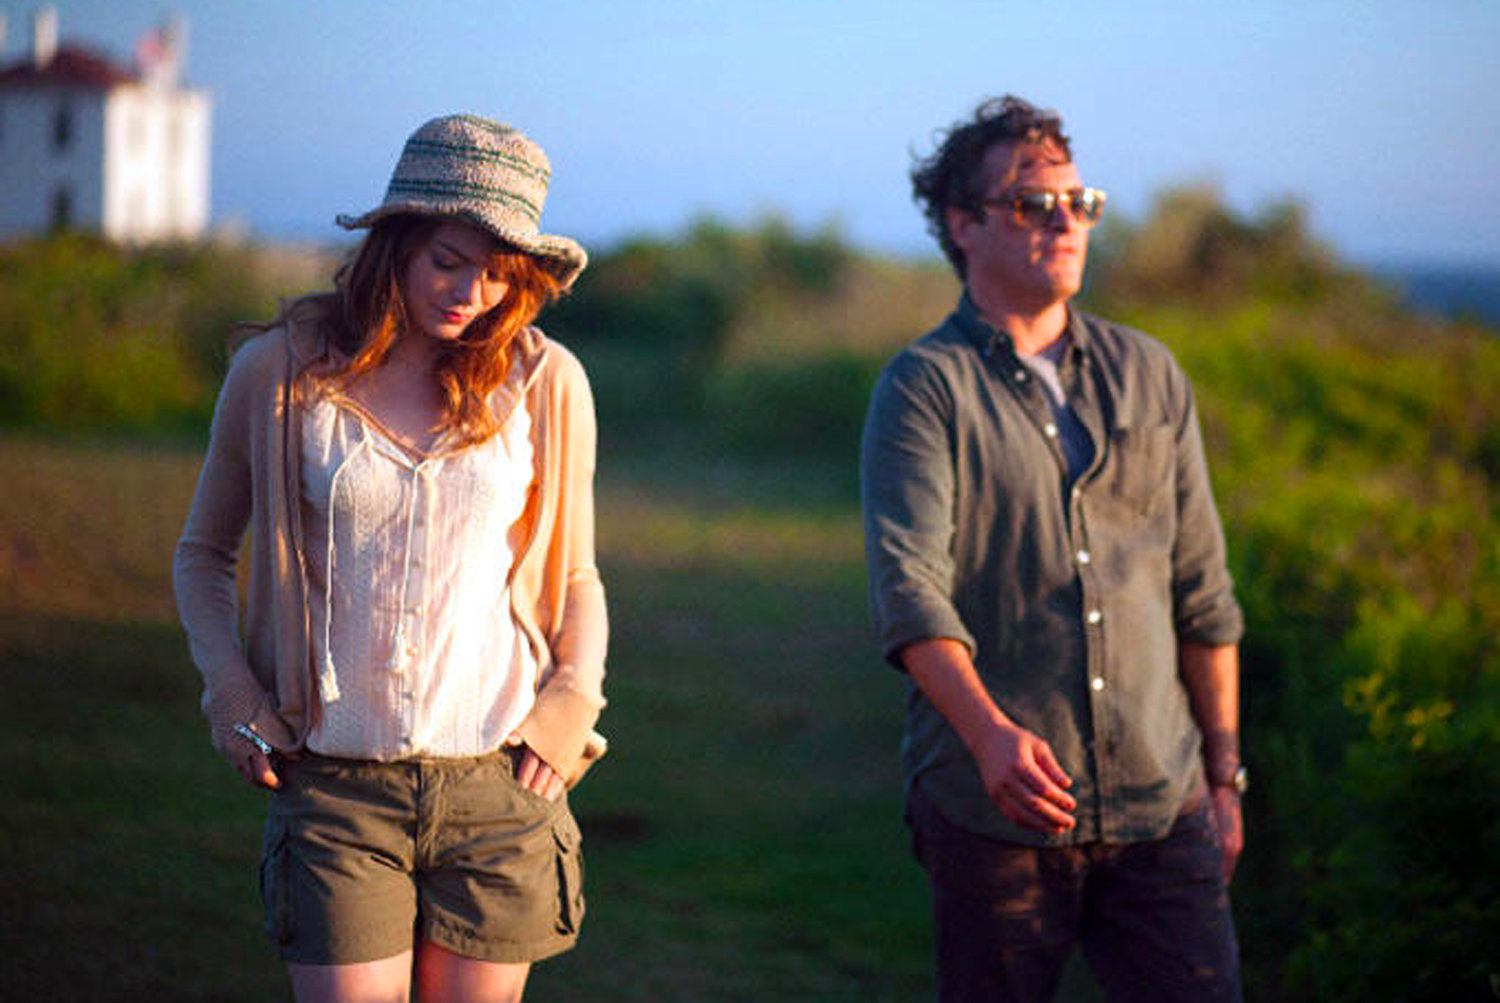 Emma Stone and Joaquin Phoenix on location for Woody Allen’s Irrational Man